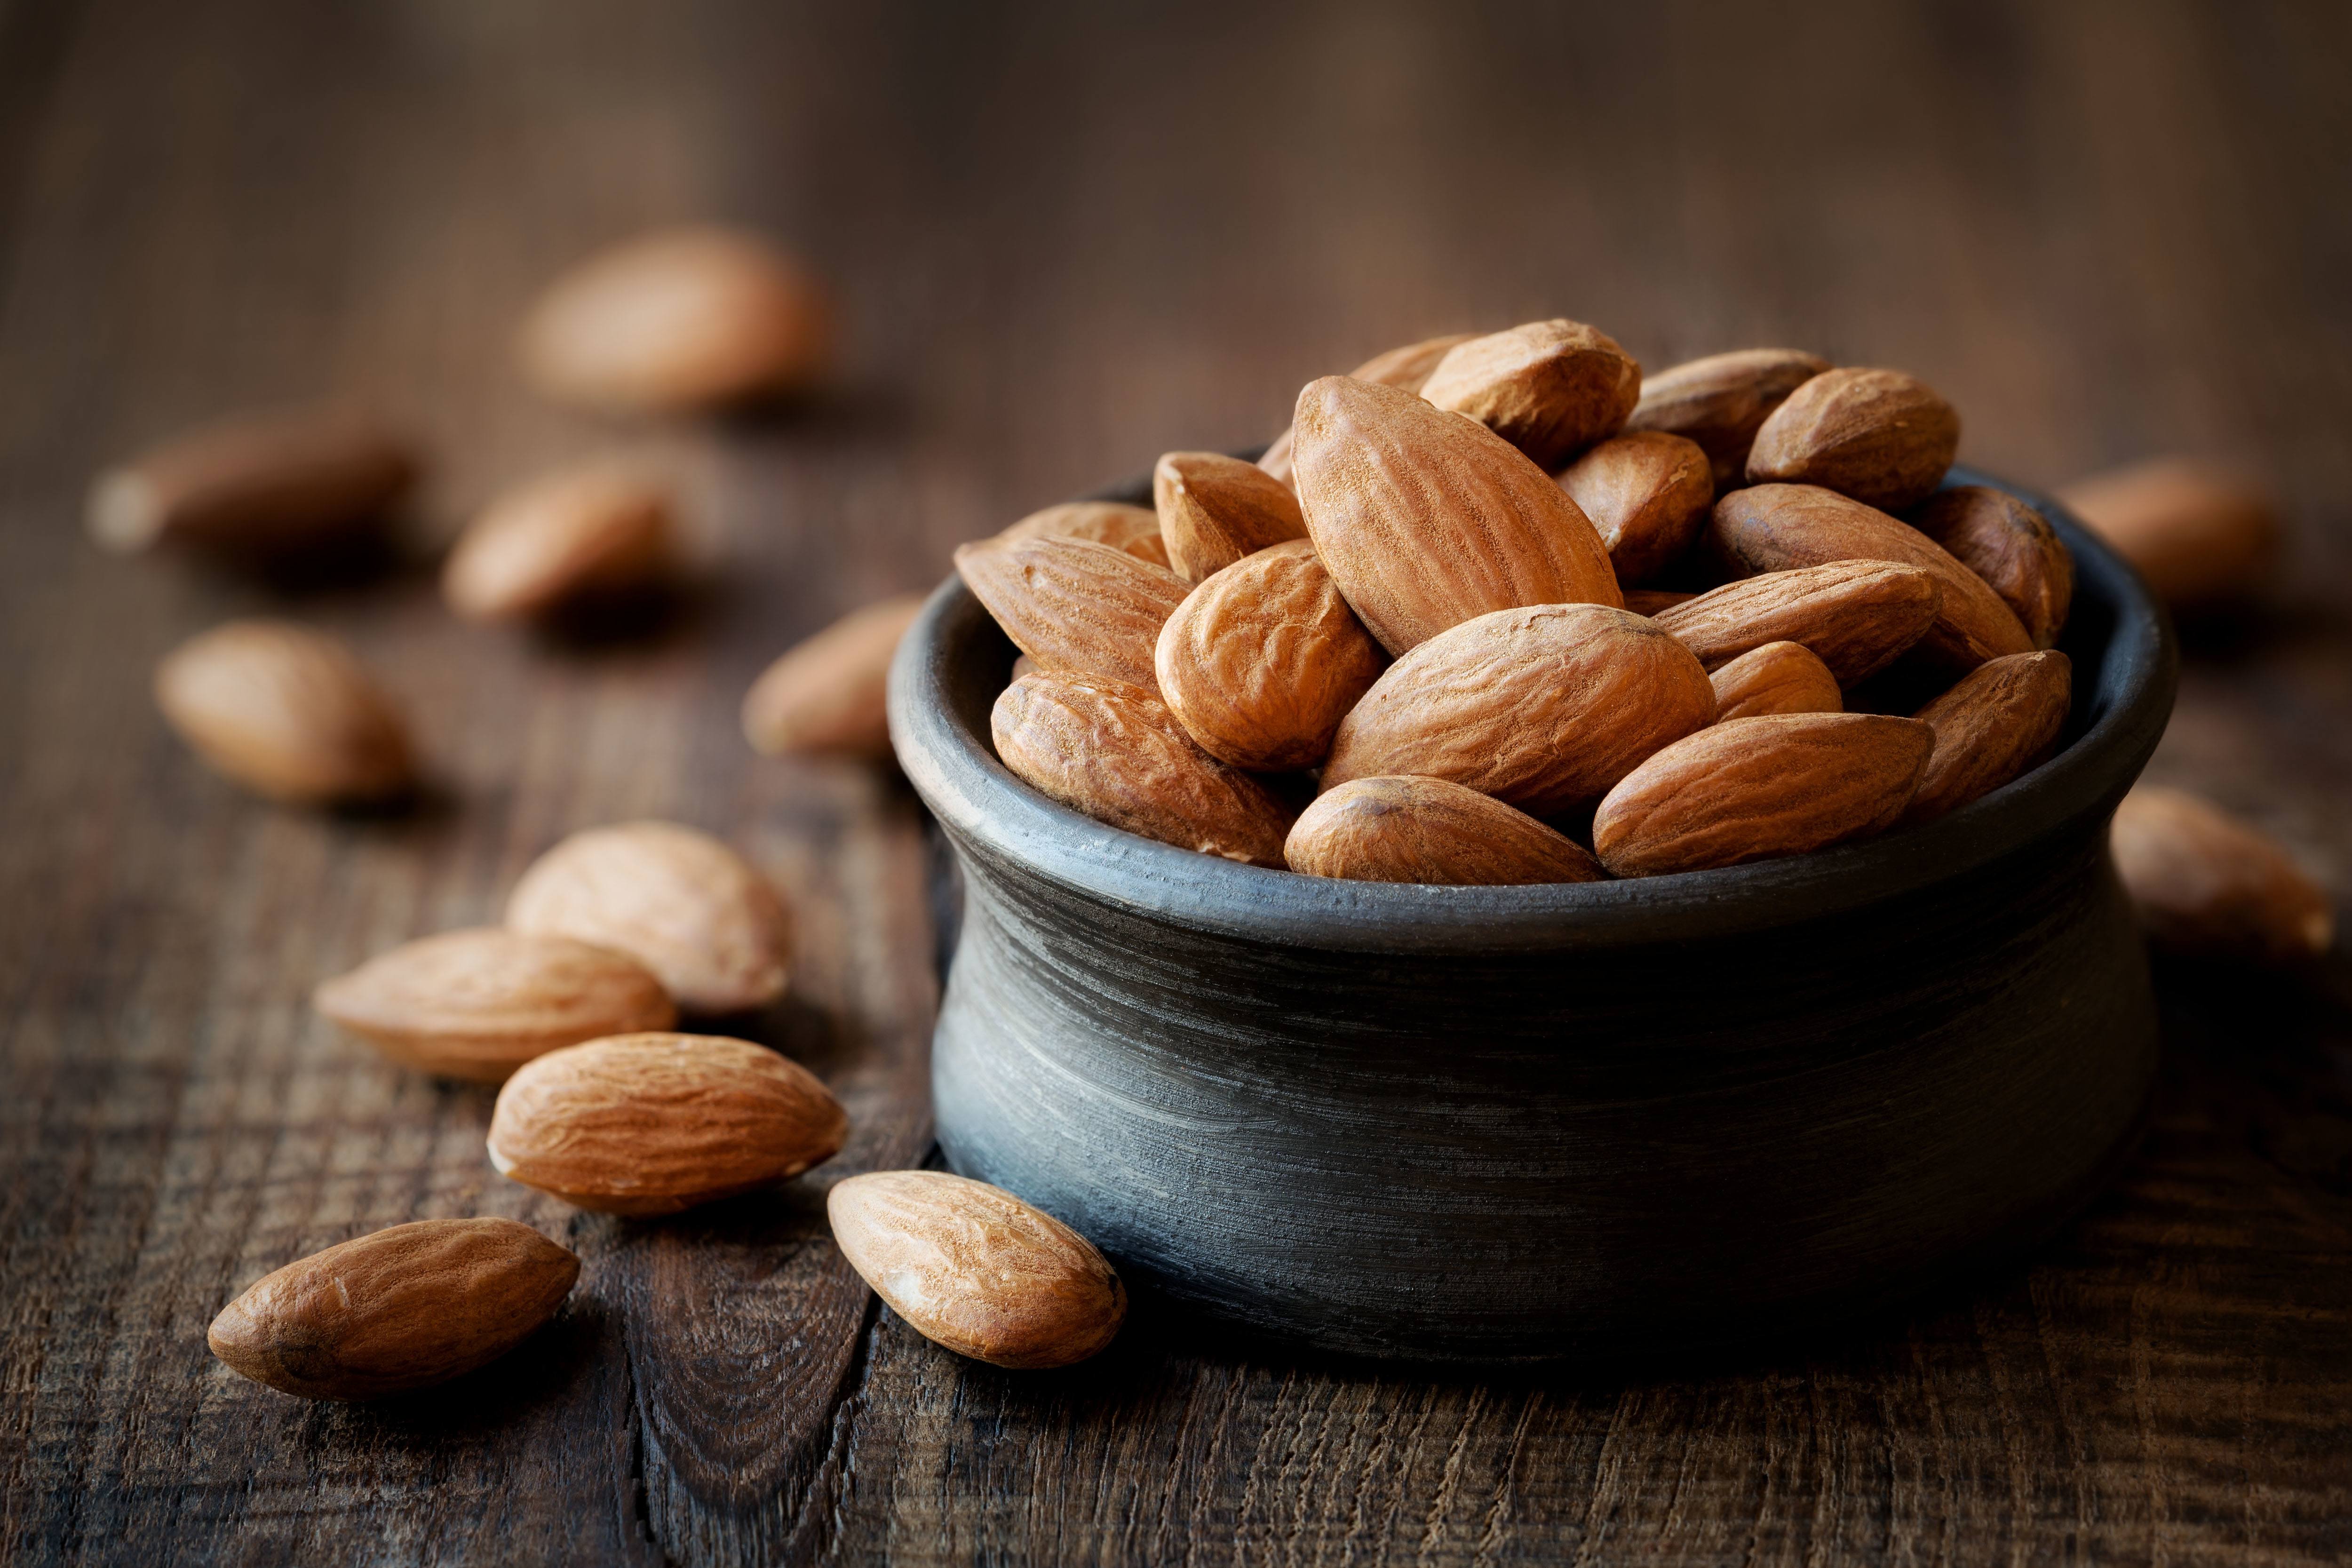 Are Nuts Bad For You? Here Are The Best Nuts For Your Health